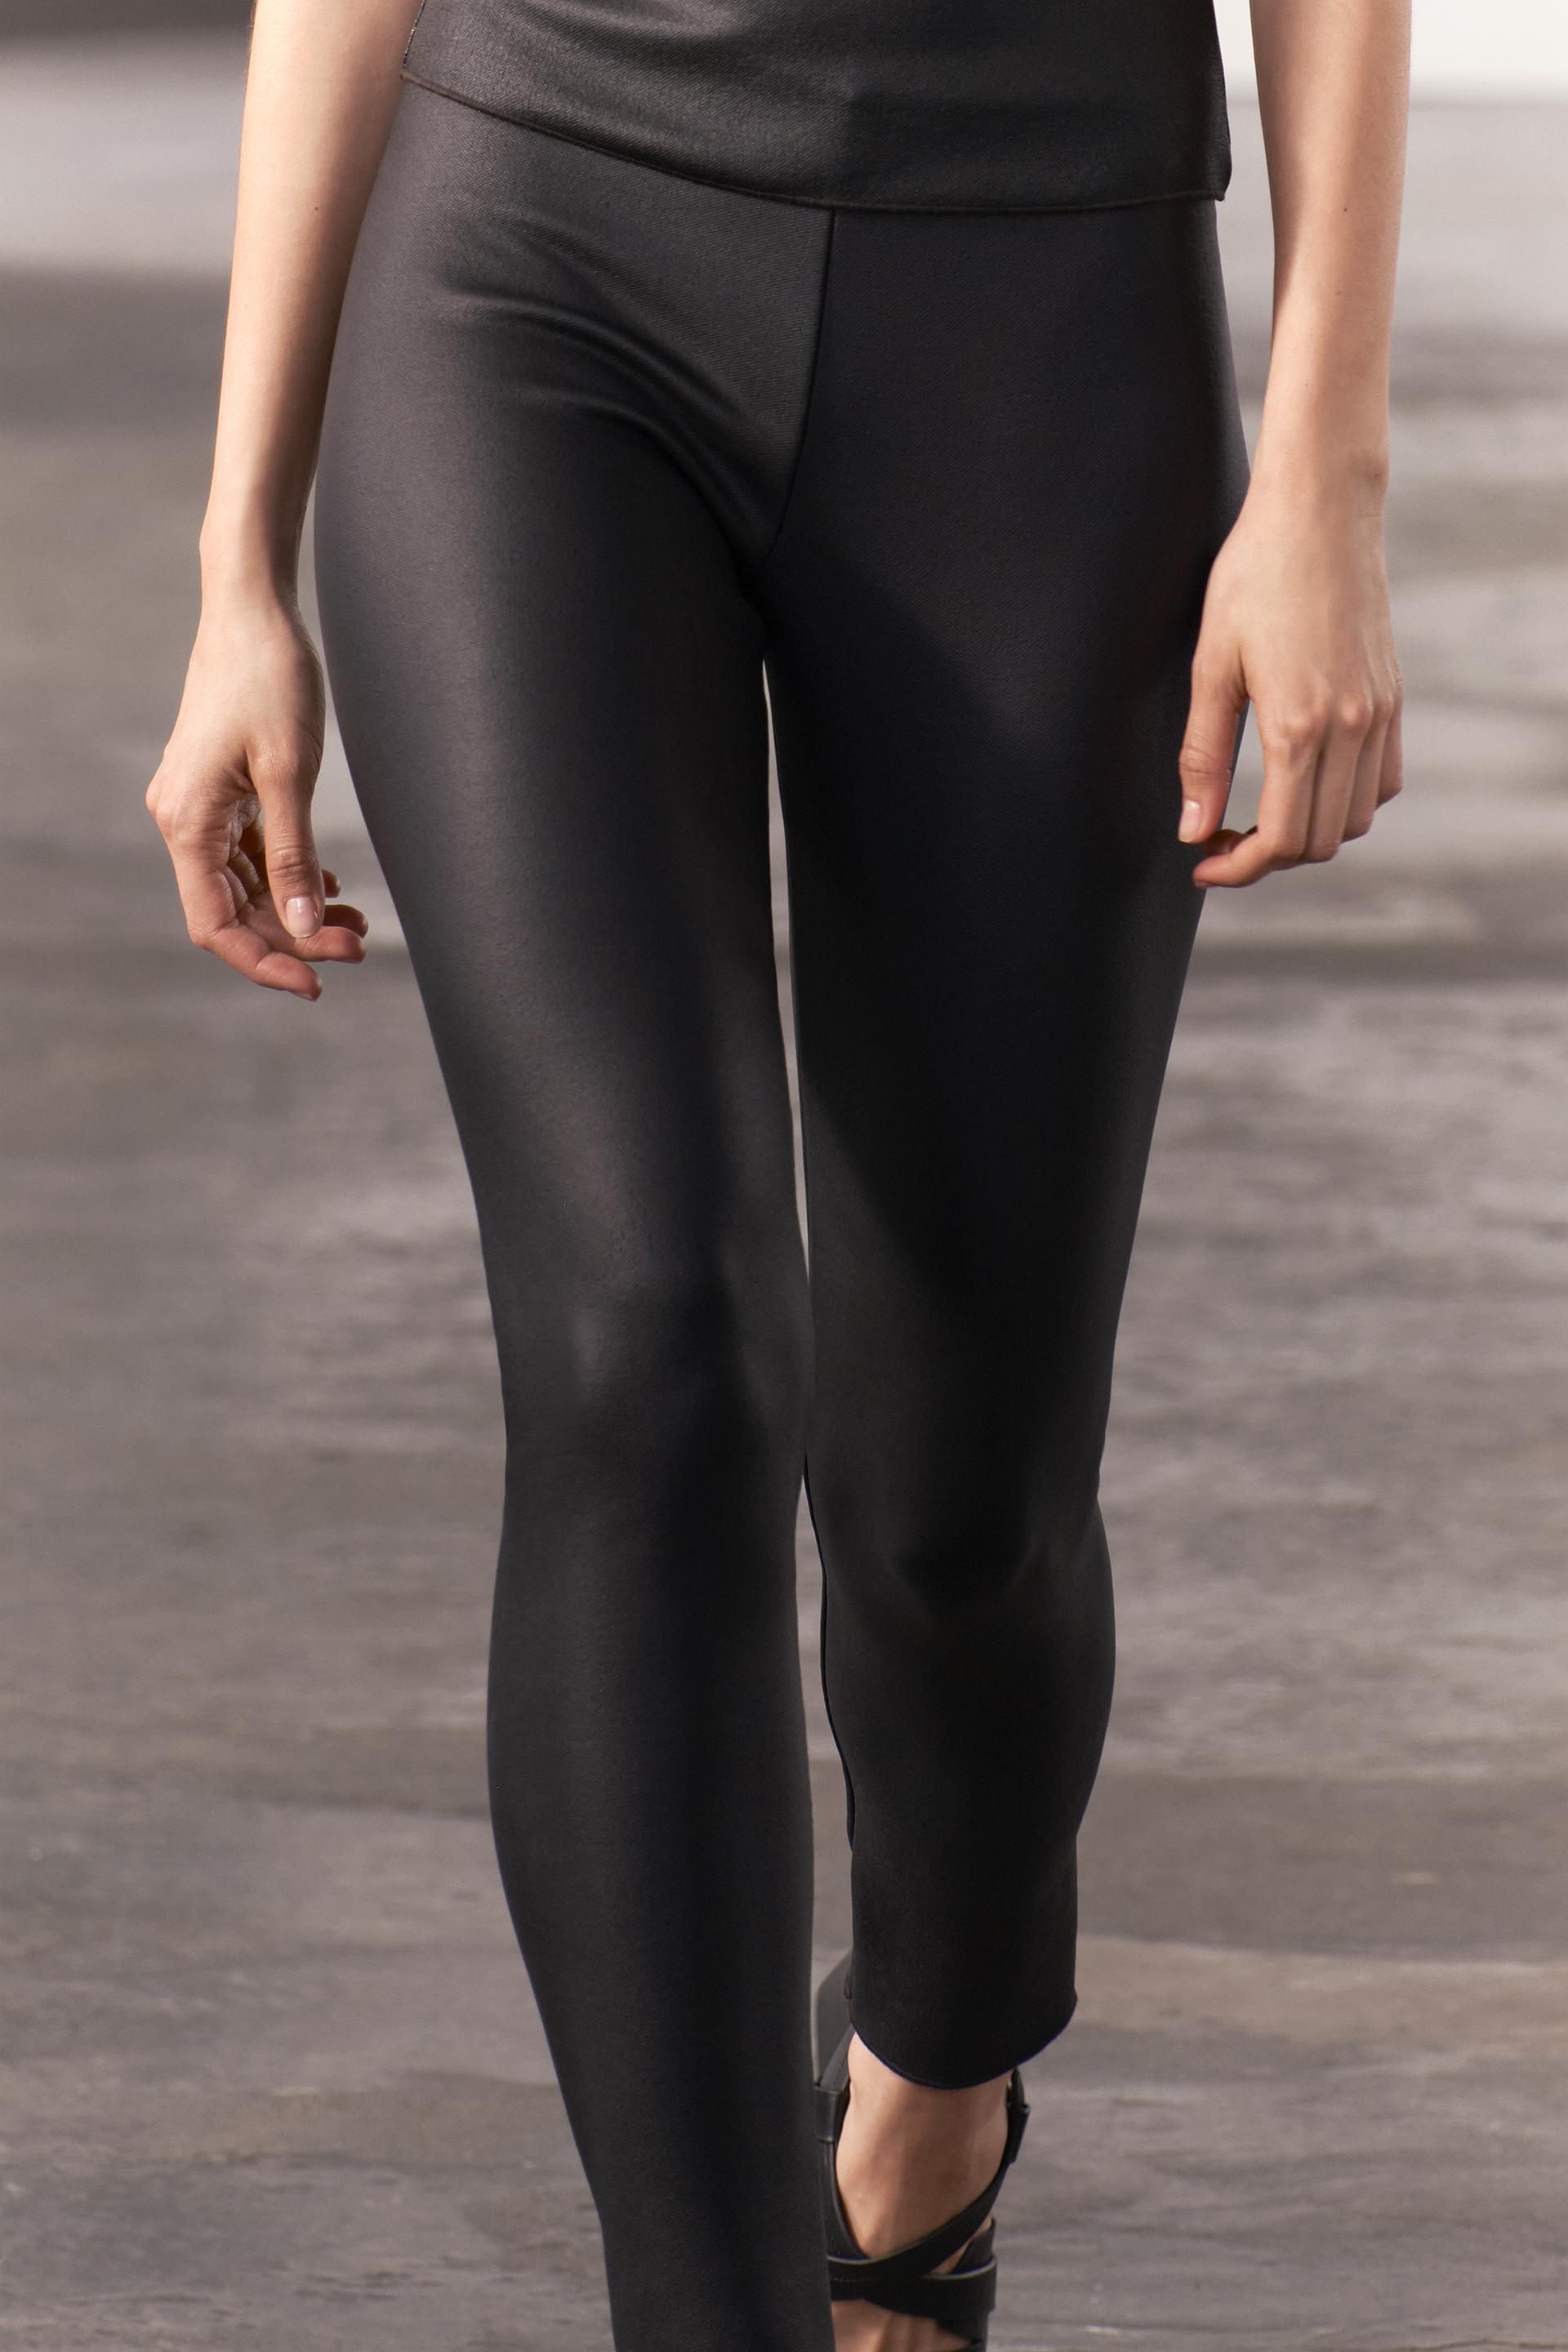 Viscose Stretch Fitted Legging – KD New York